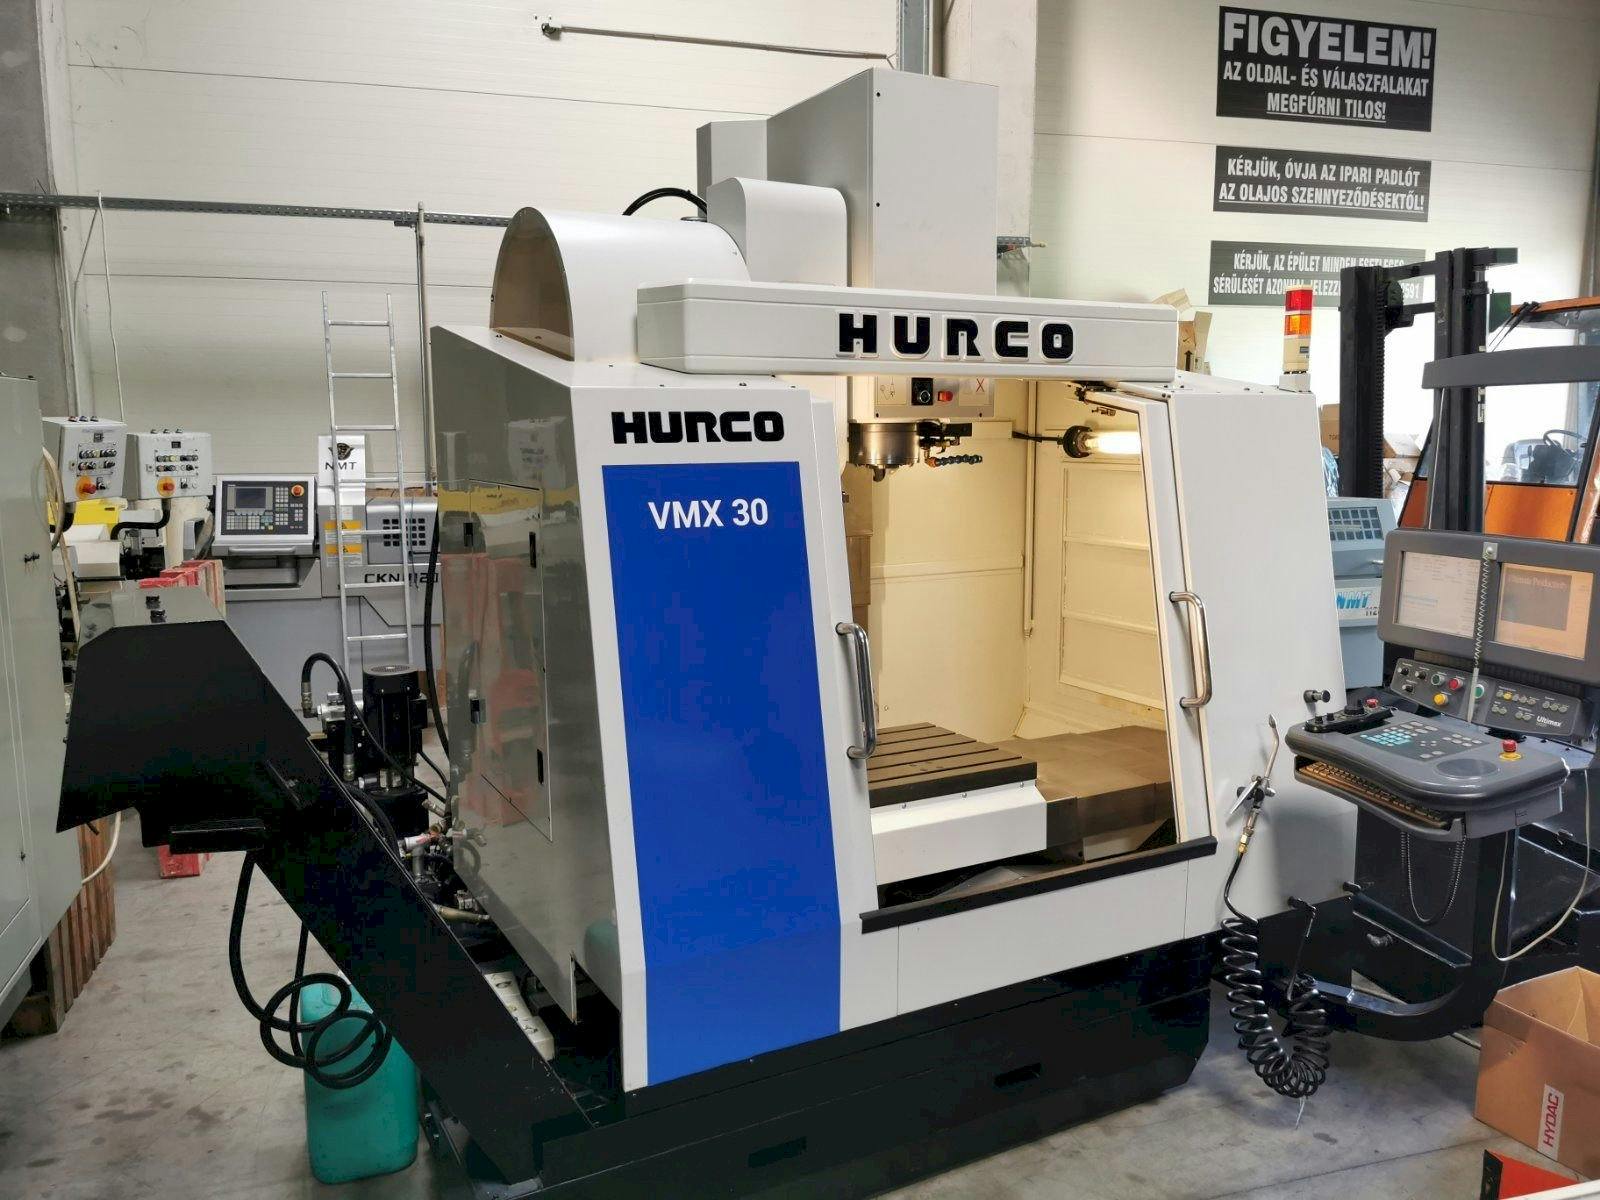 Front view of Hurco VMX30  machine